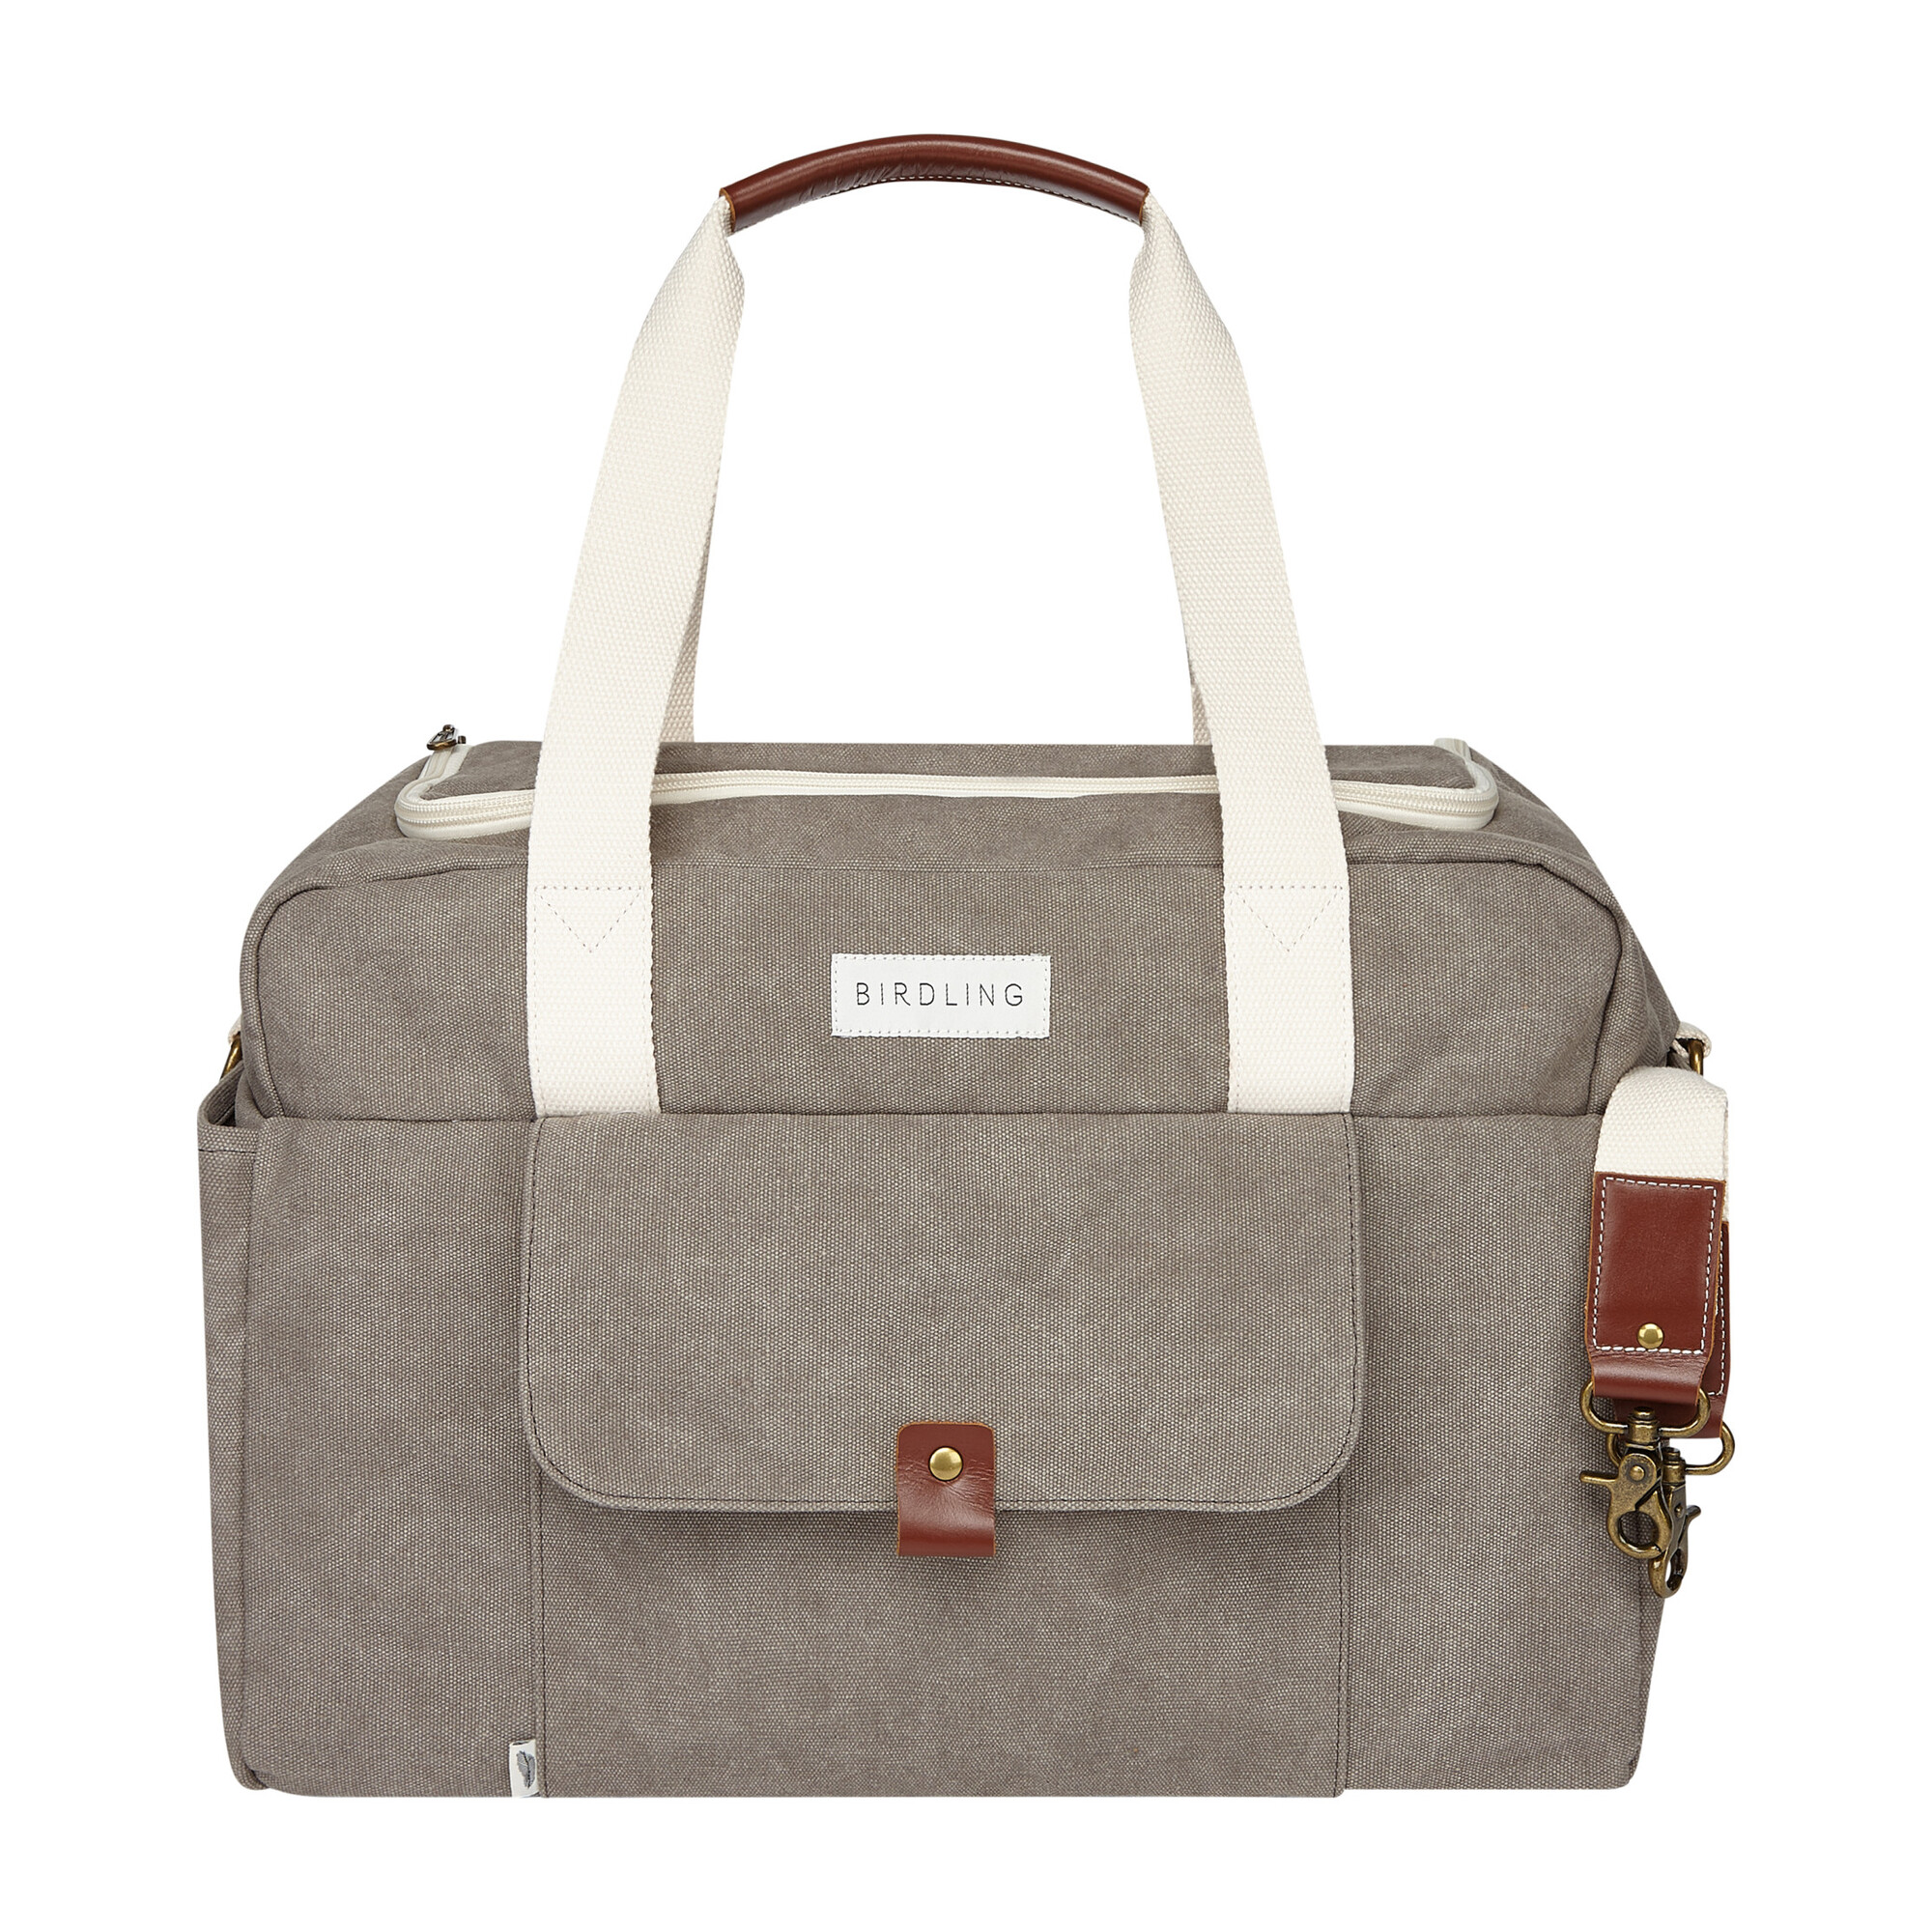 Overnighter, Washed Grey - Gear Diaper Bags & Luggage - Maisonette